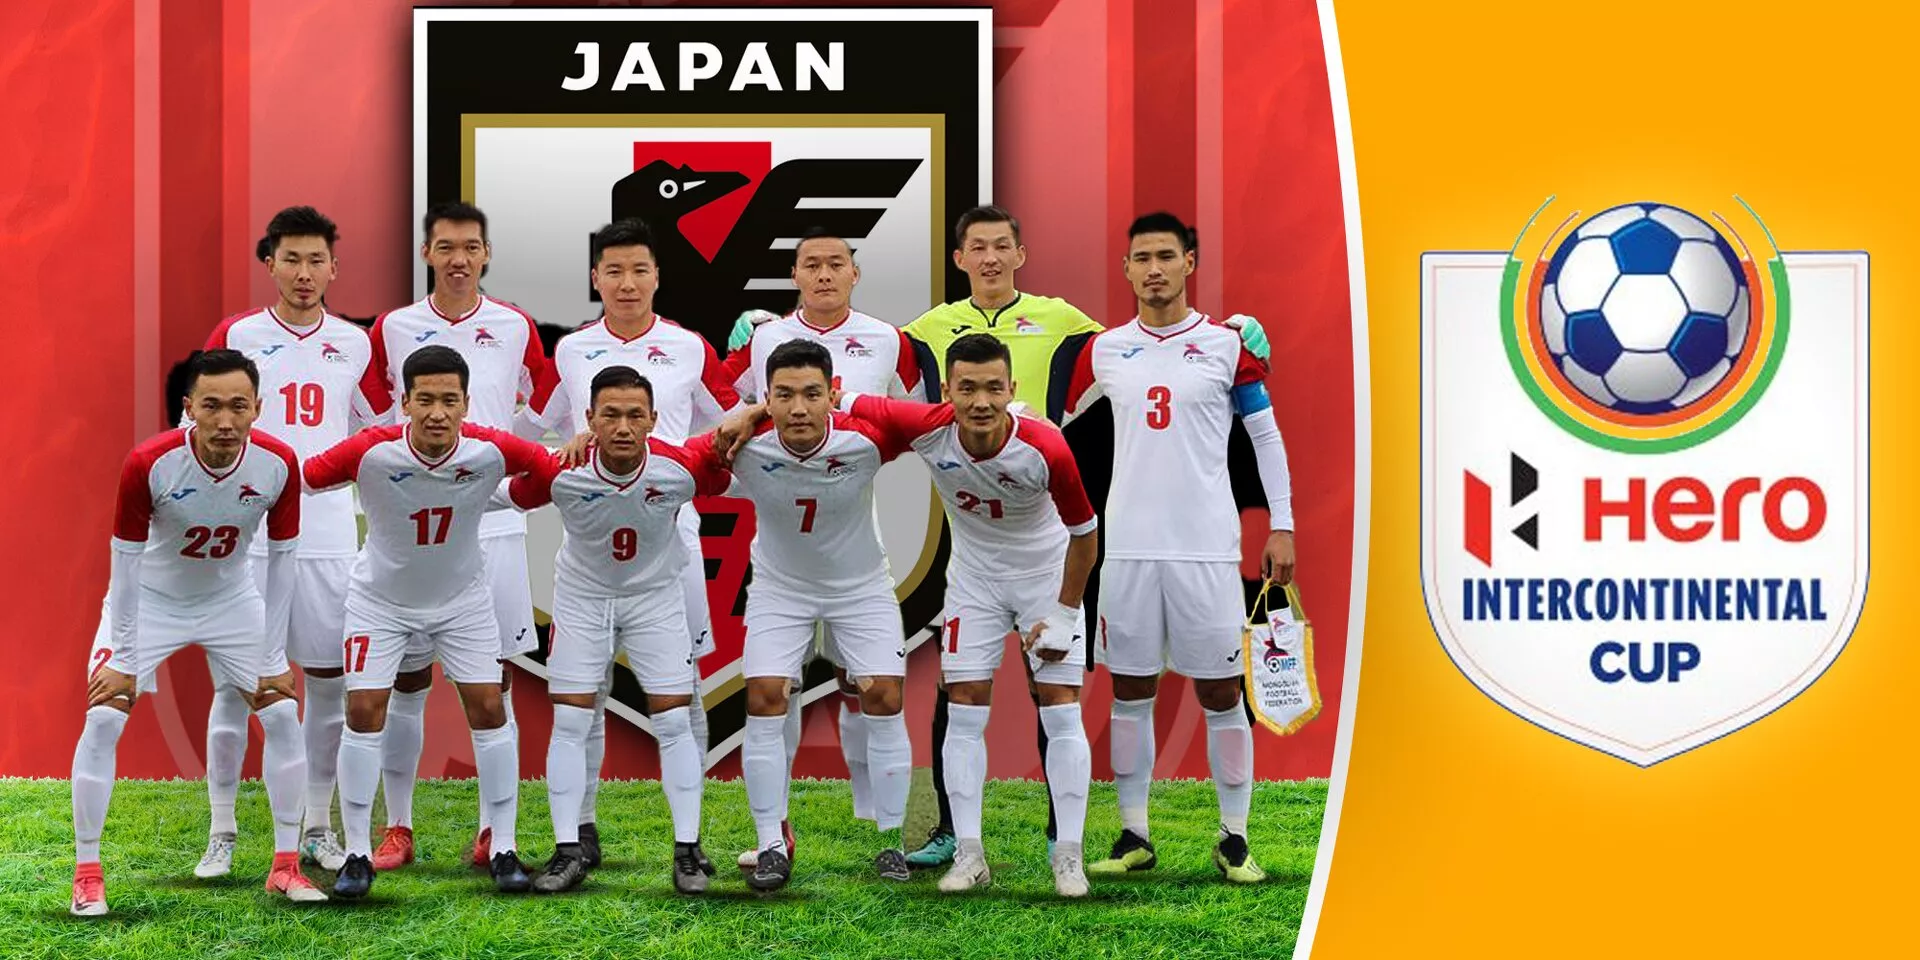 Hero Intercontinental Cup: How Mongolia is connected to Japanese football